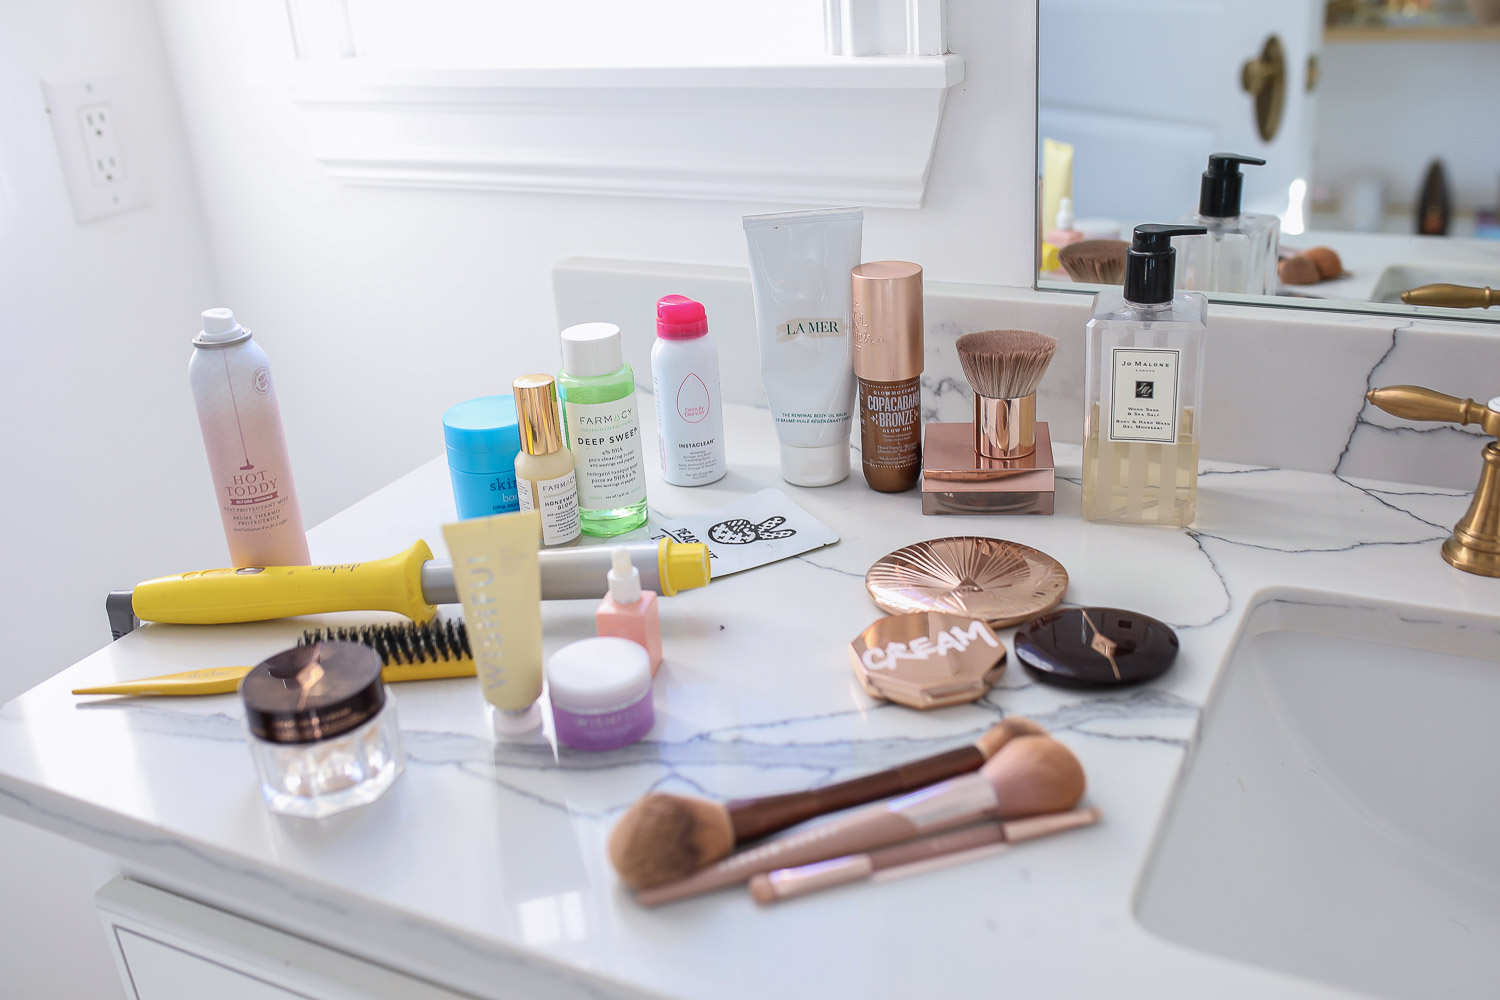 Sephora savings event fall 2020, beauty blogger sephora favorites fall 2020, emily ann gemma |Sephora Beauty Insider Sale by popular US beauty blog, The Sweetest Thing: image of Sephora beauty products products on a bathroom vanity counter. 